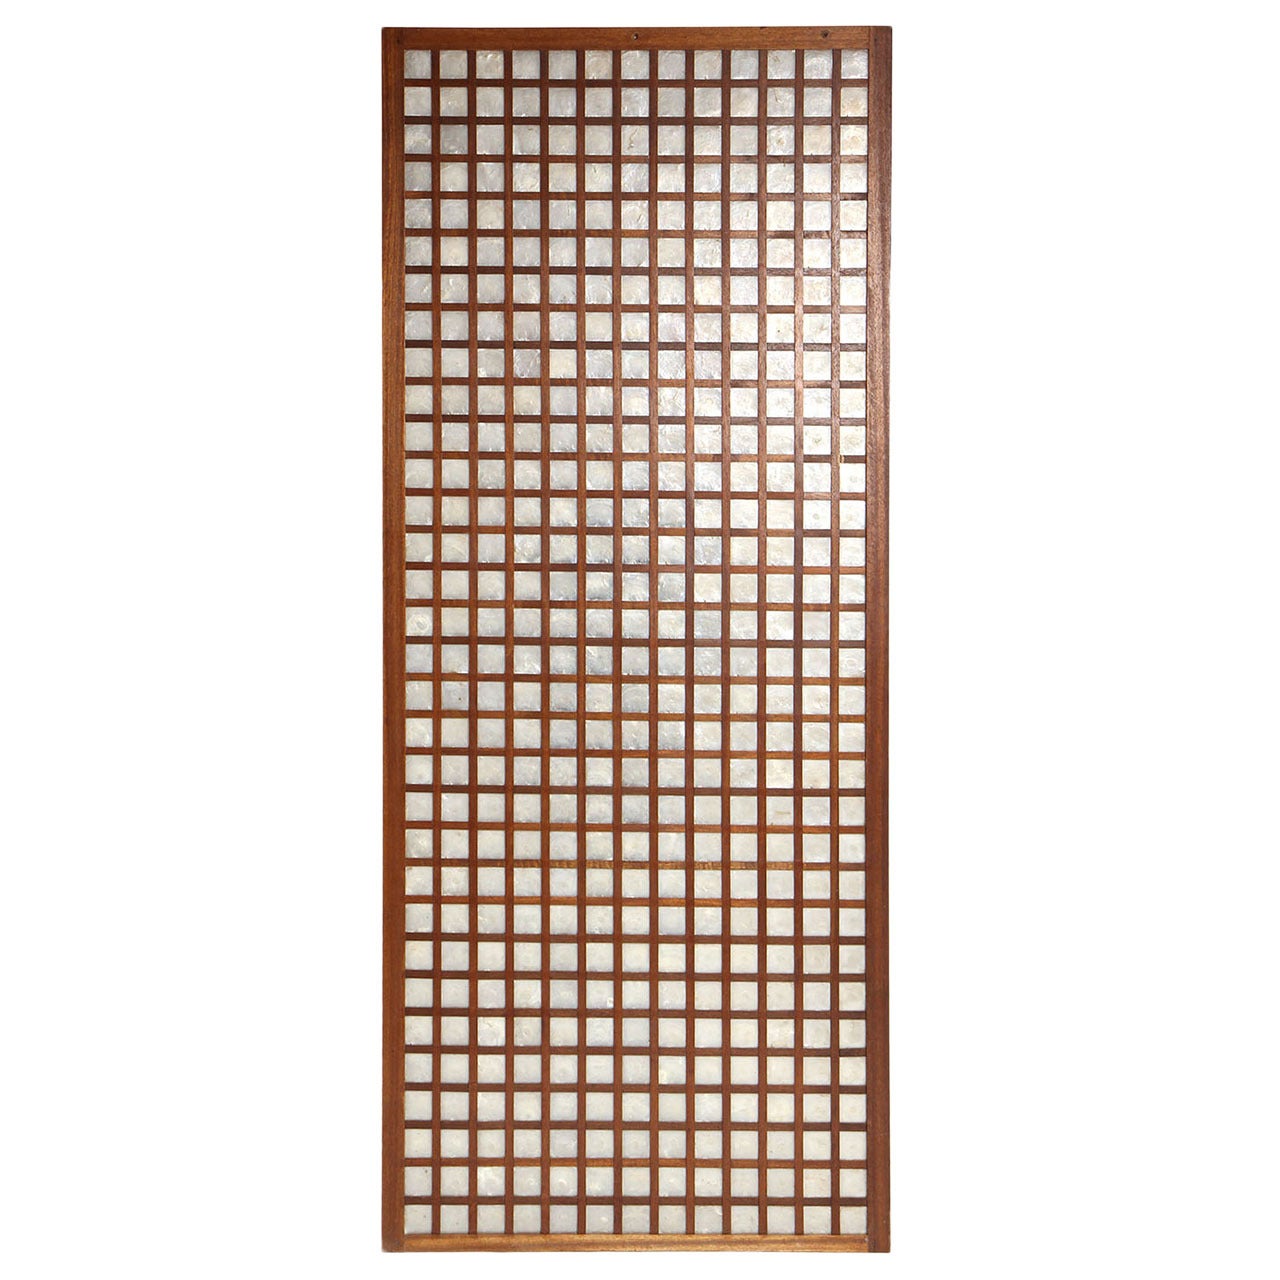 1950s Mahogany and Capiz Shell Gridded Panel For Sale